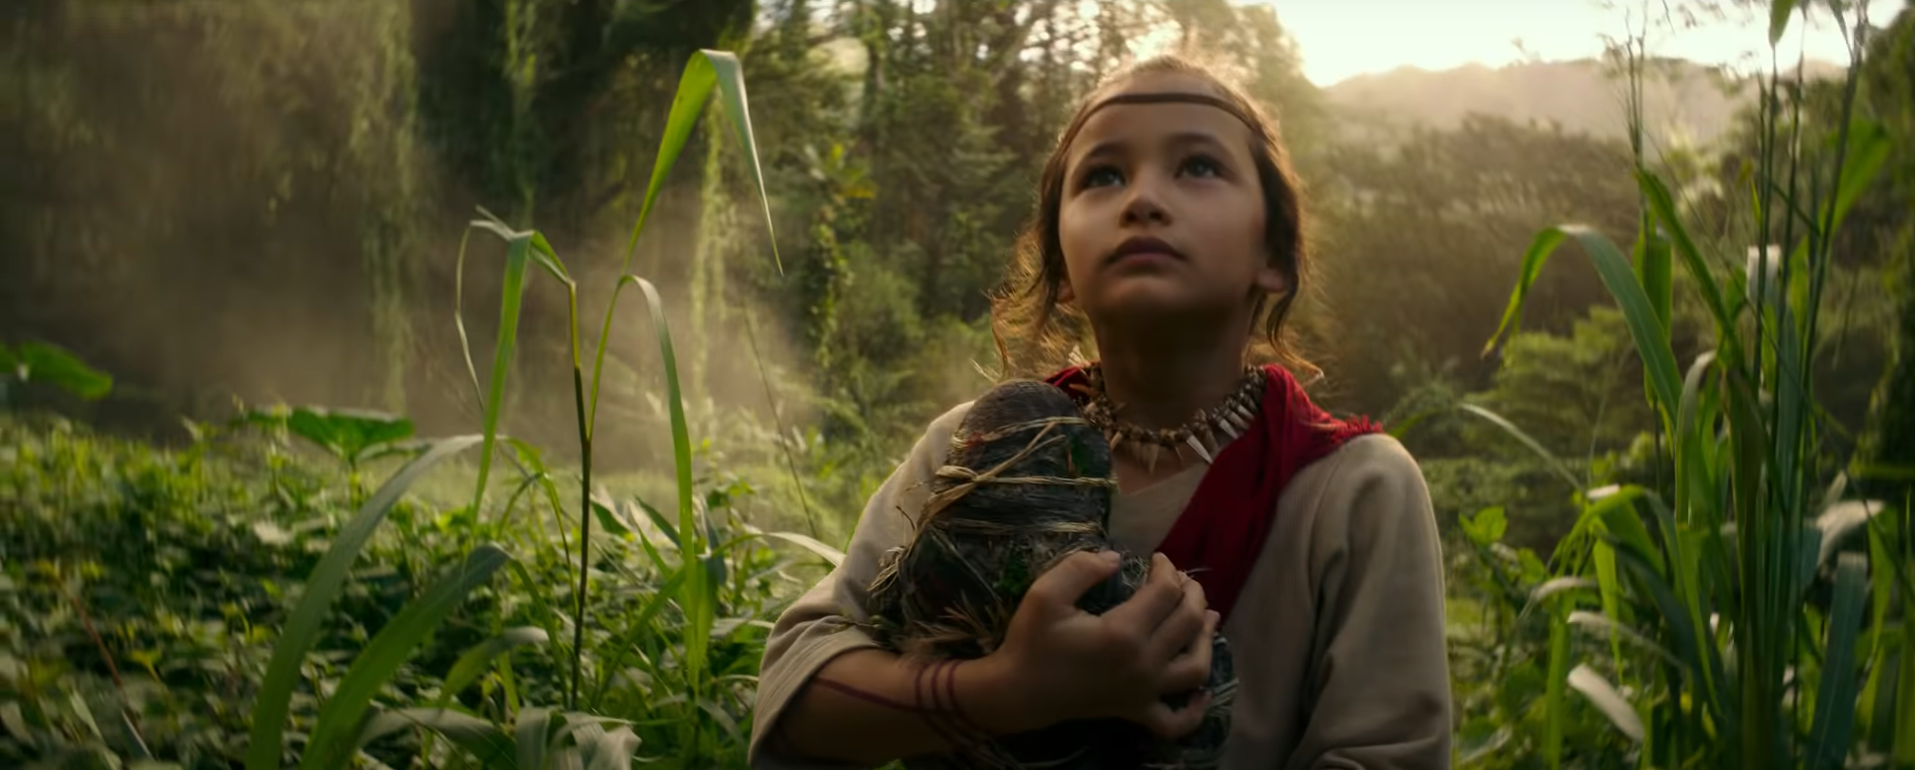 Jia (Kaylee Hottle), a young Indigenous girl holding a homemade Kong doll, stands in a jungle.